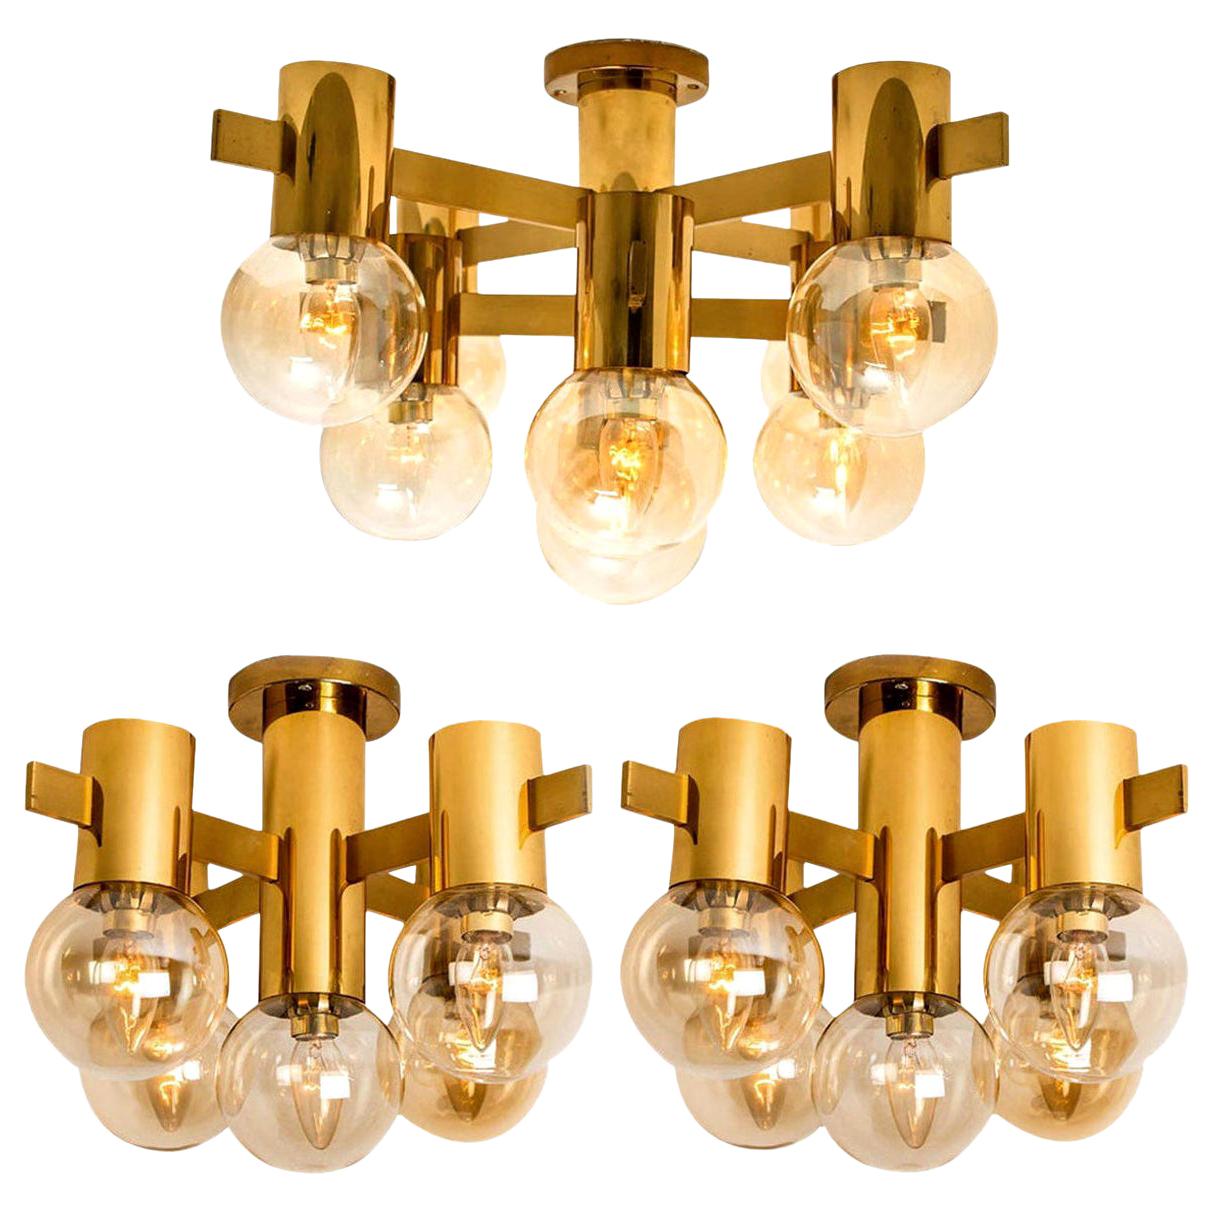 1 of the 3 Brass and Glass Light Fixtures in the Style of Jakobsson, 1960s For Sale 5